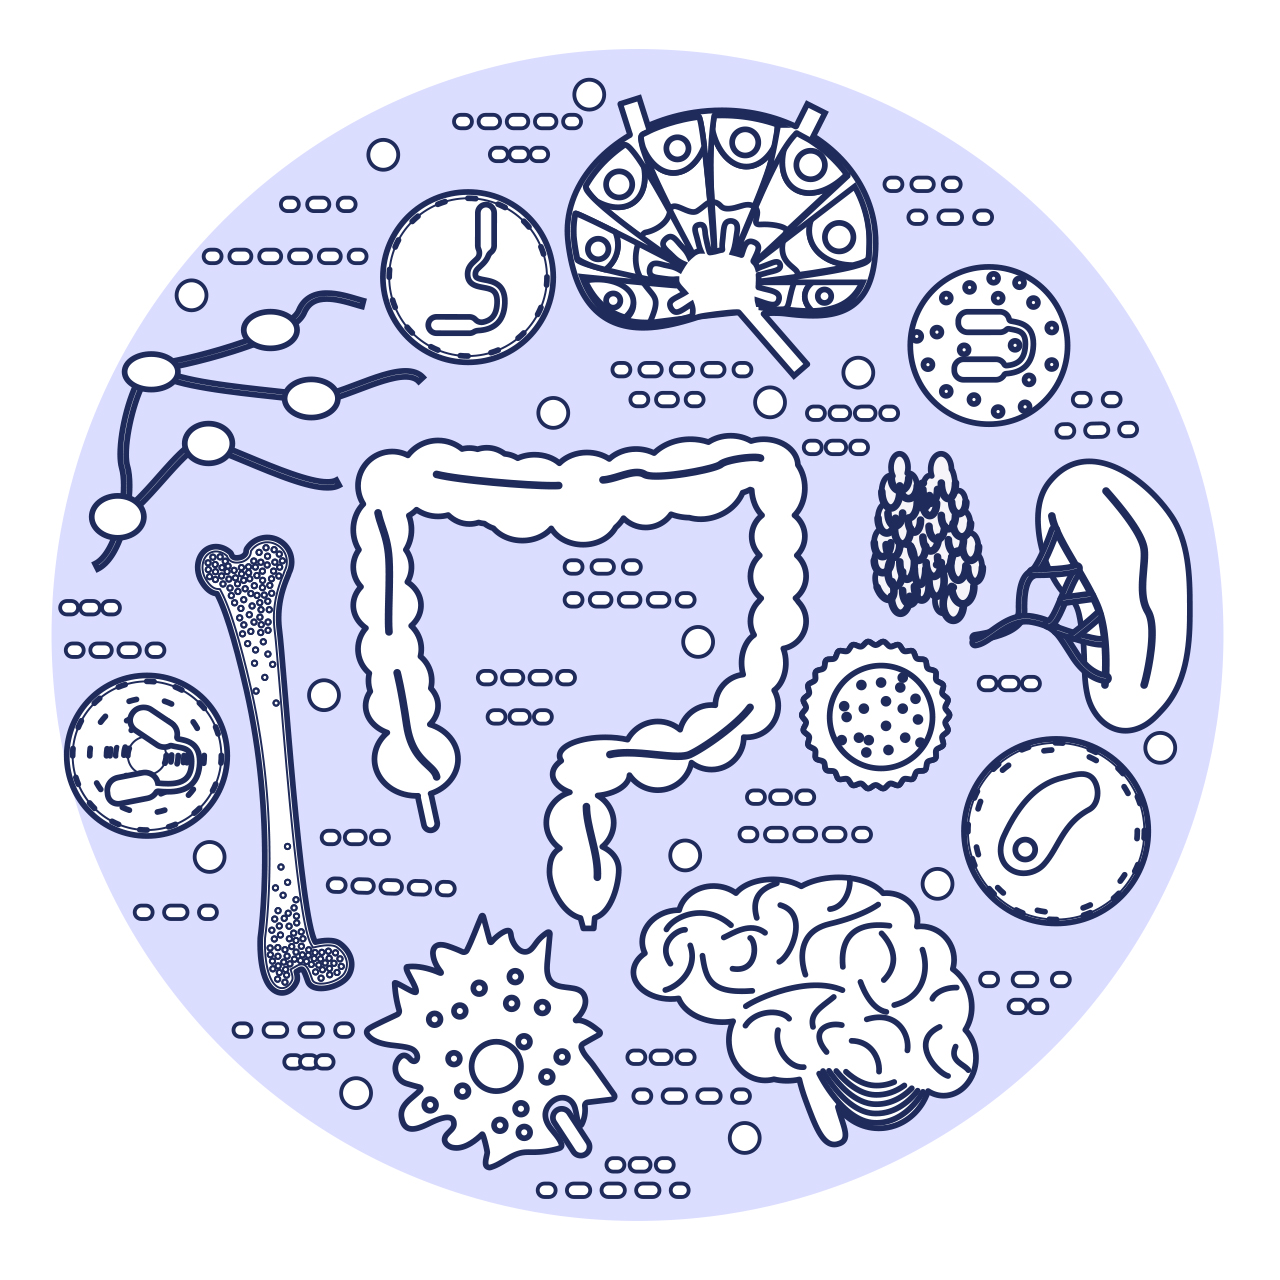 A circle holds icons representing various components of the immune system.